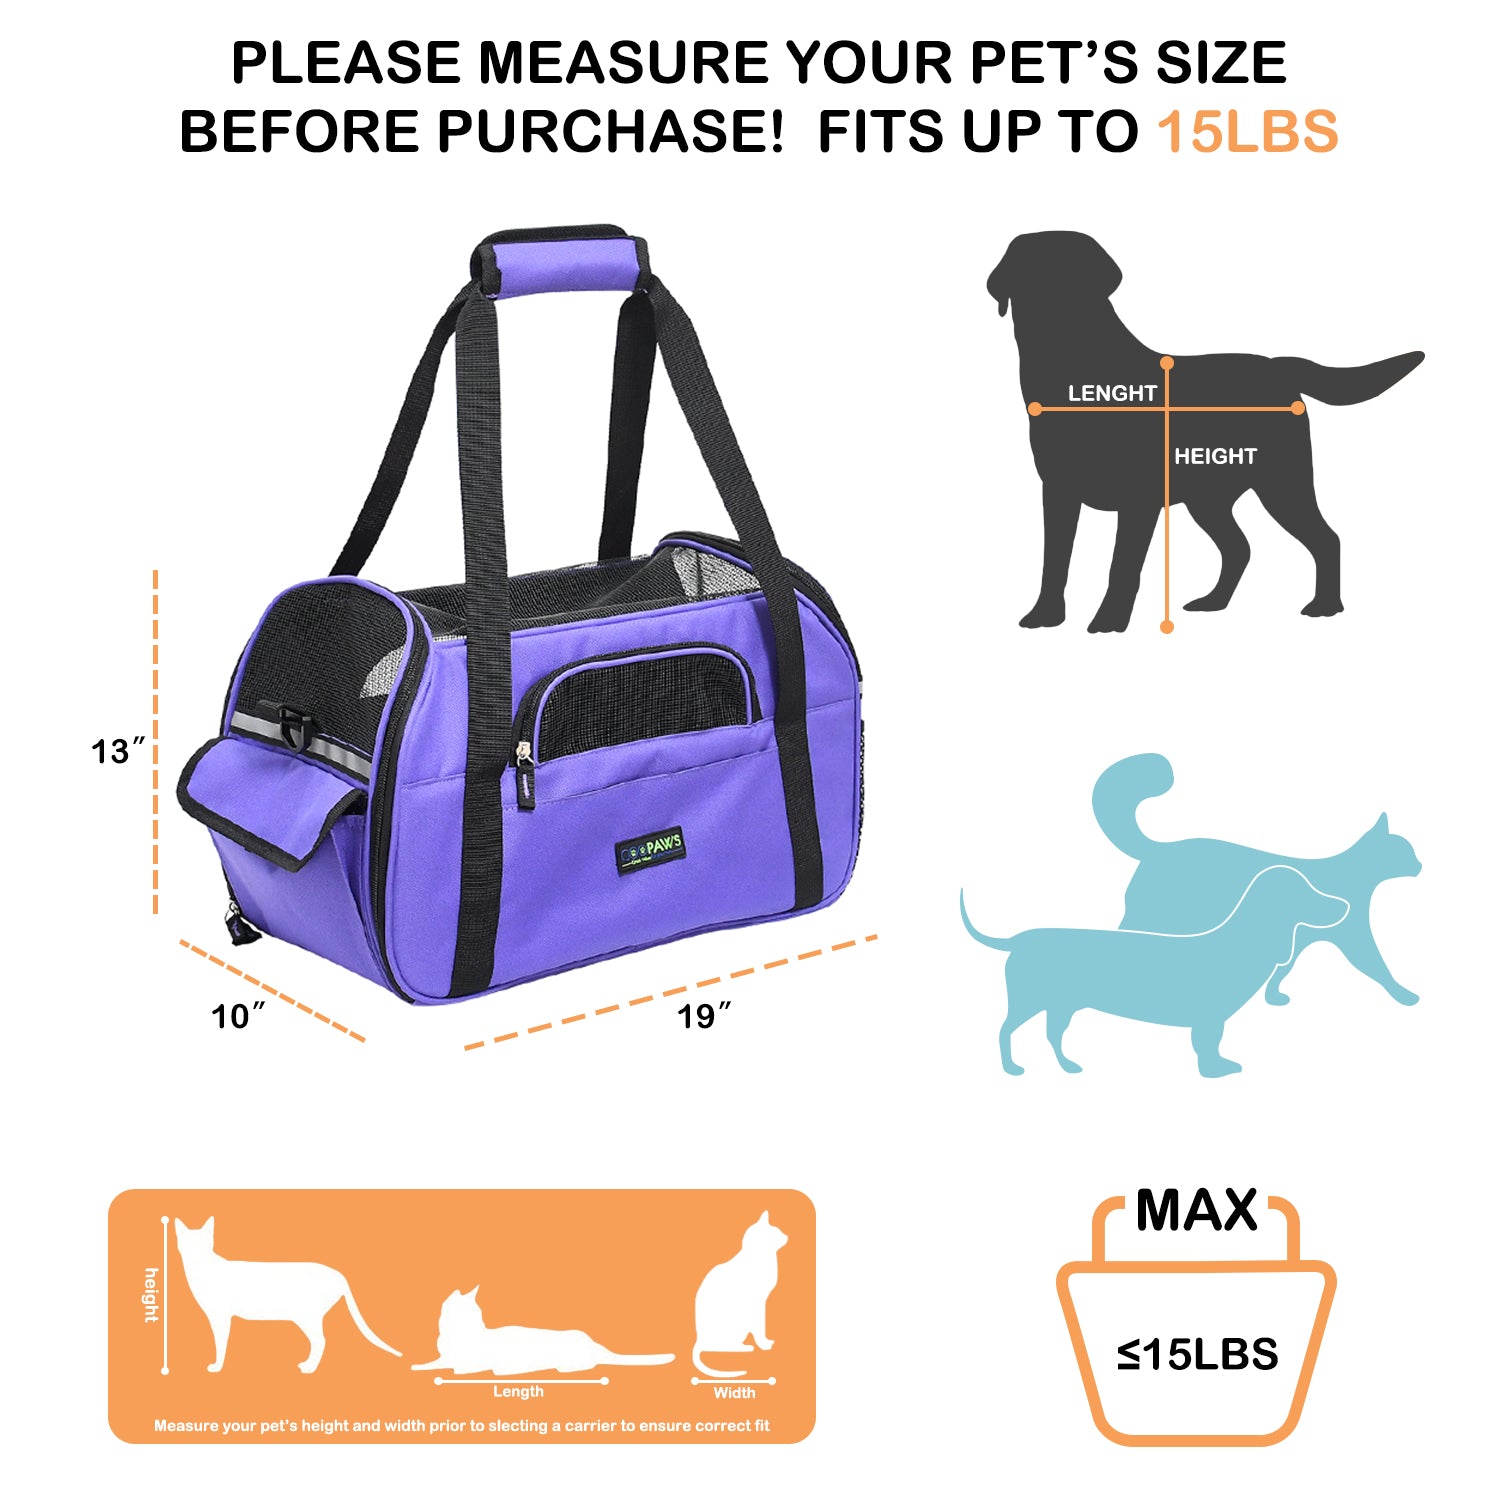 GOOPAWS Soft Sided Small Pet Carrier Comfort for Travel, Purple, 19"